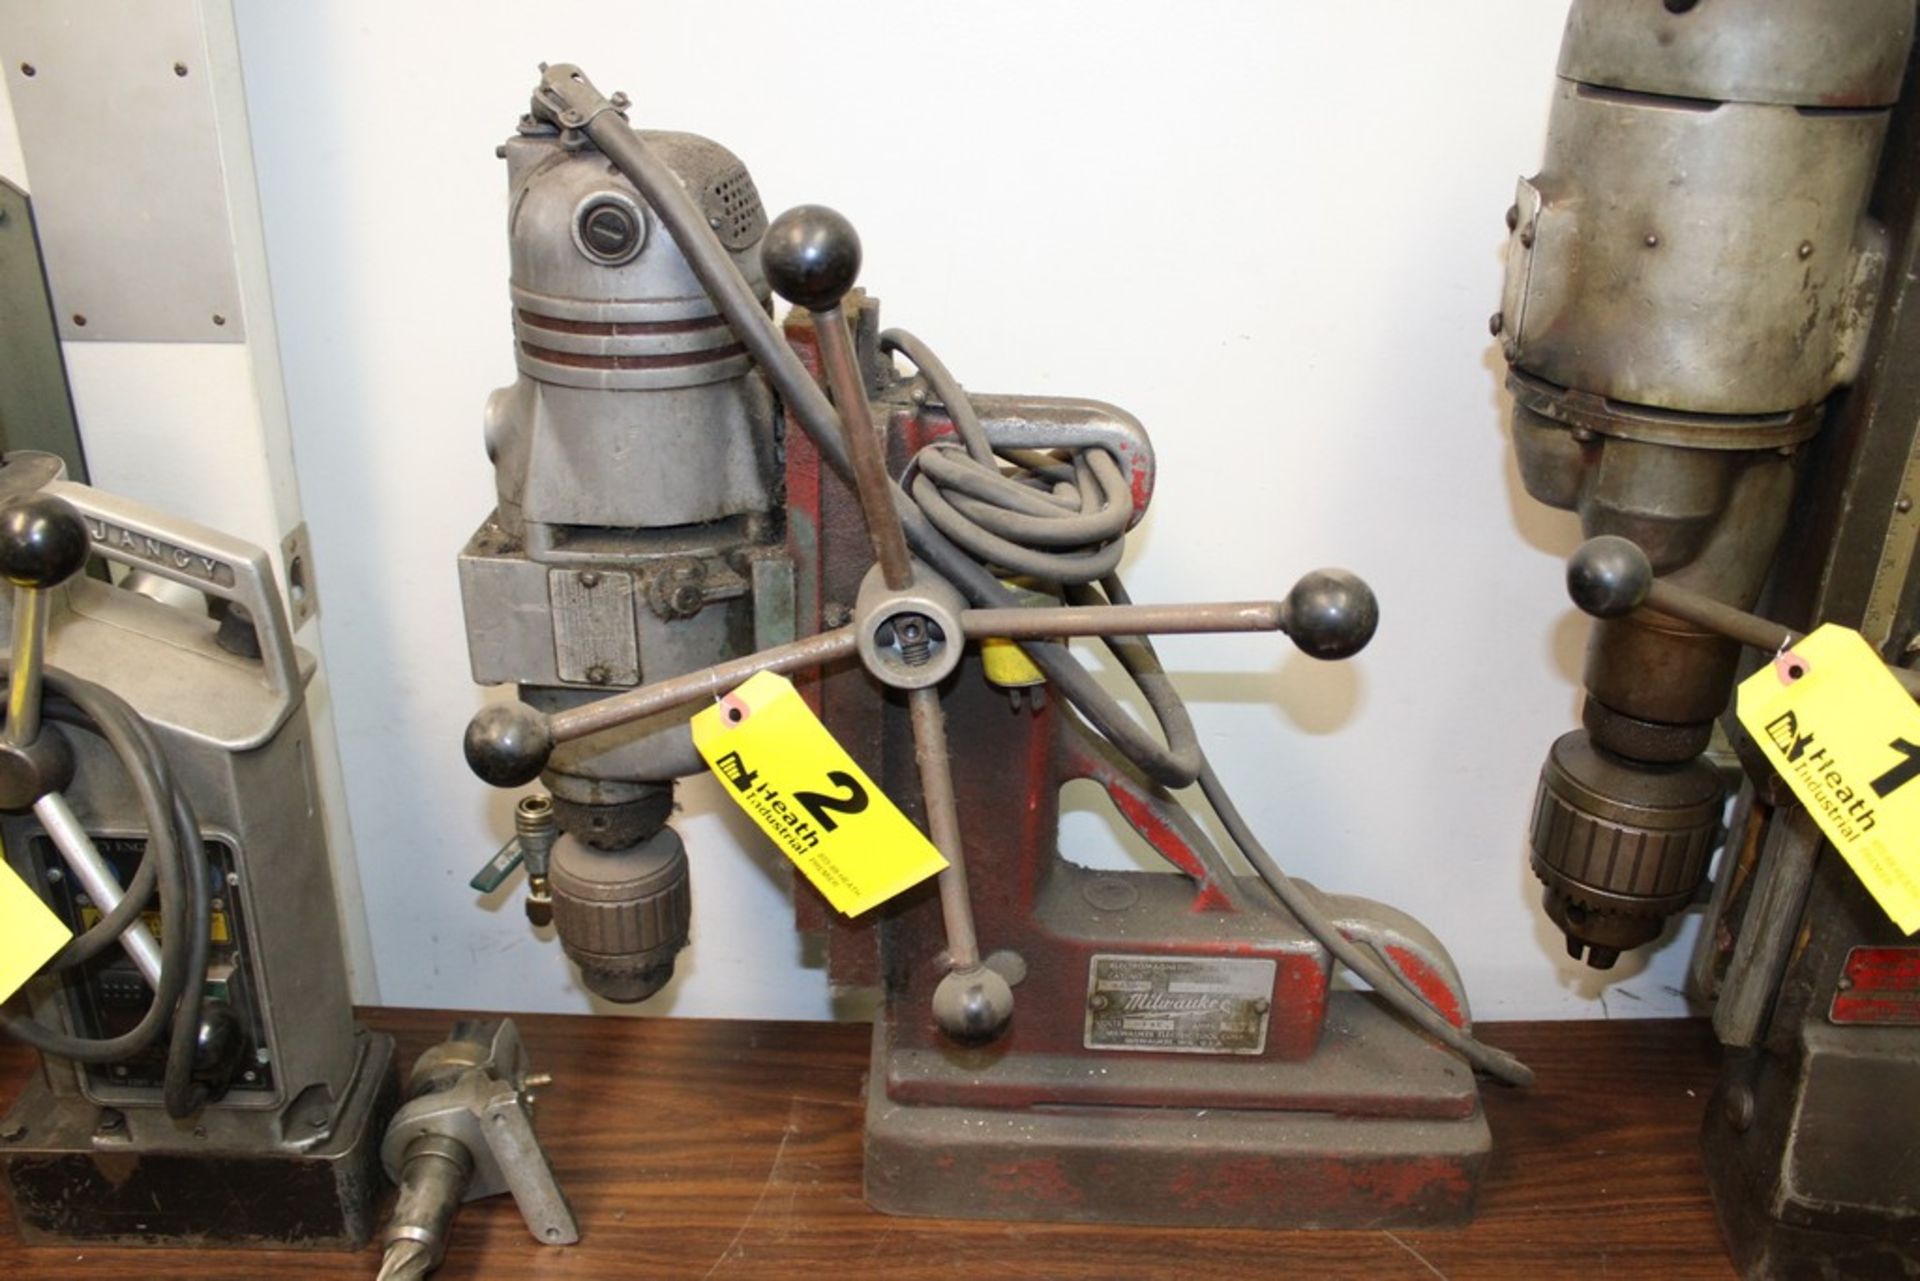 MILWAUKEE NO. 4220 ELECTROMAGNETIC DRILL PRESS